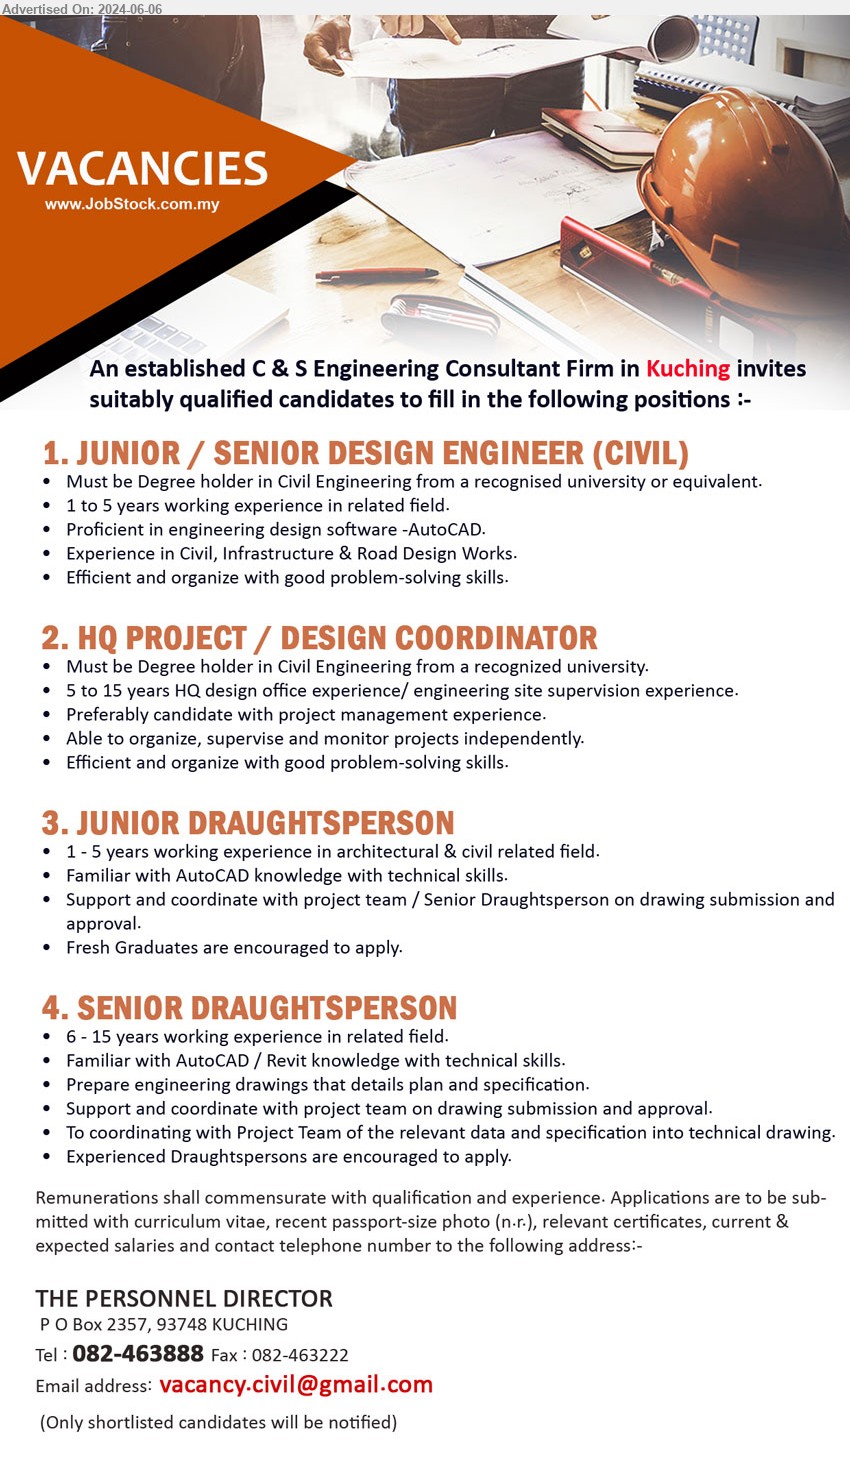 ADVERTISER (C & S Consultant Firm) - 1. JUNIOR / SENIOR DESIGN ENGINEER (CIVIL) (Kuching), Degree holder in Civil Engineering, 1 to 5 yrs. exp.,...
2. HQ PROJECT / DESIGN COORDINATOR (Kuching),  Degree holder in Civil Engineering, 5 to 15 years HQ design office experience/ engineering site supervision experience.,...
3. JUNIOR DRAUGHTSPERSON (Kuching), 1-5 yrs. exp., Familiar with AutoCAD knowledge with technical skills,...
4. SENIOR DRAUGHTSPERSON (Kuching), 6-15 yrs. exp., Familiar with AutoCAD / Revit knowledge with technical skills.,...
Call 082-463888 / Email resume to ...